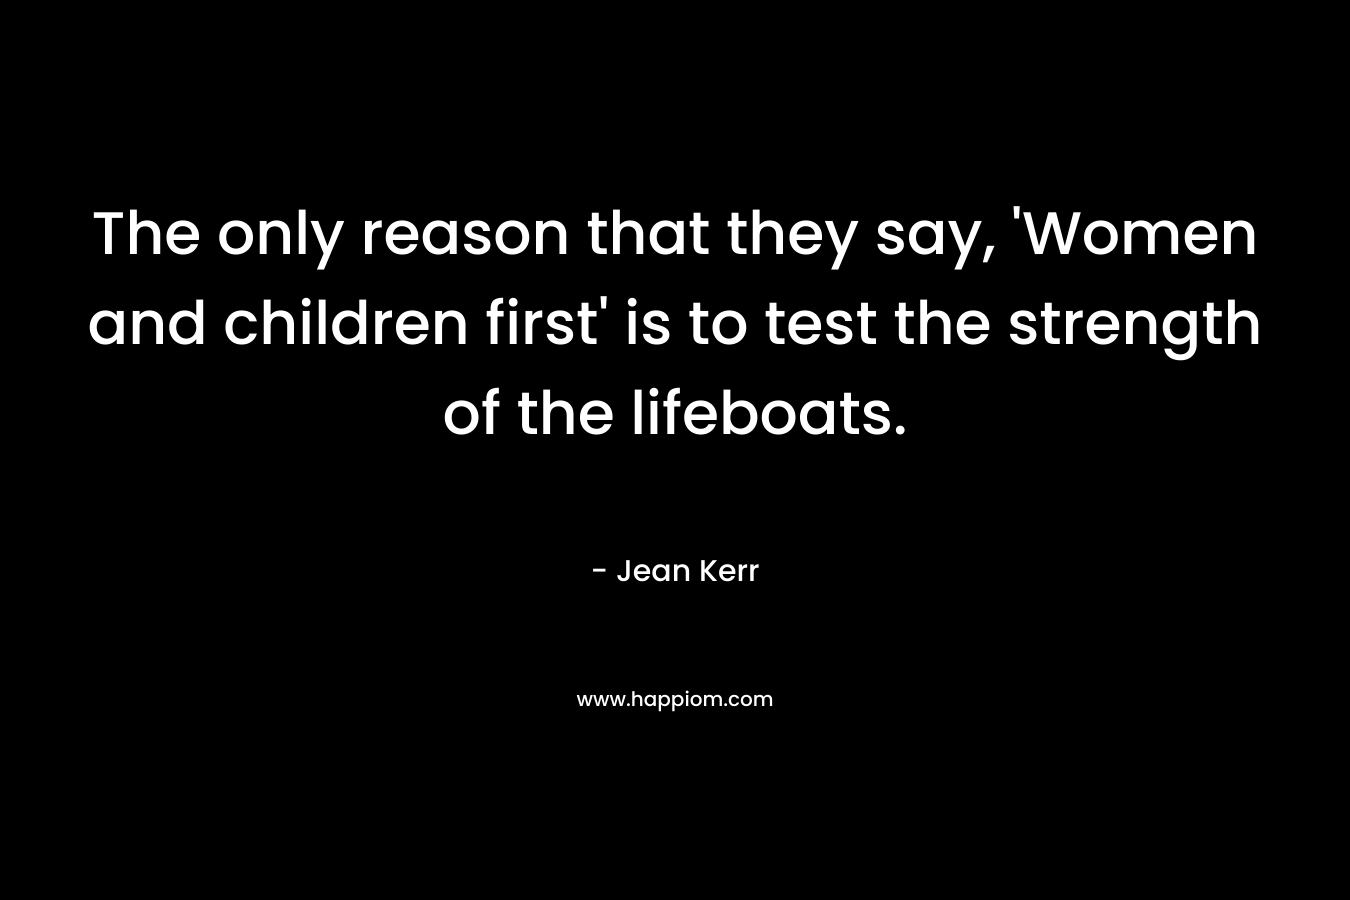 The only reason that they say, ‘Women and children first’ is to test the strength of the lifeboats. – Jean Kerr